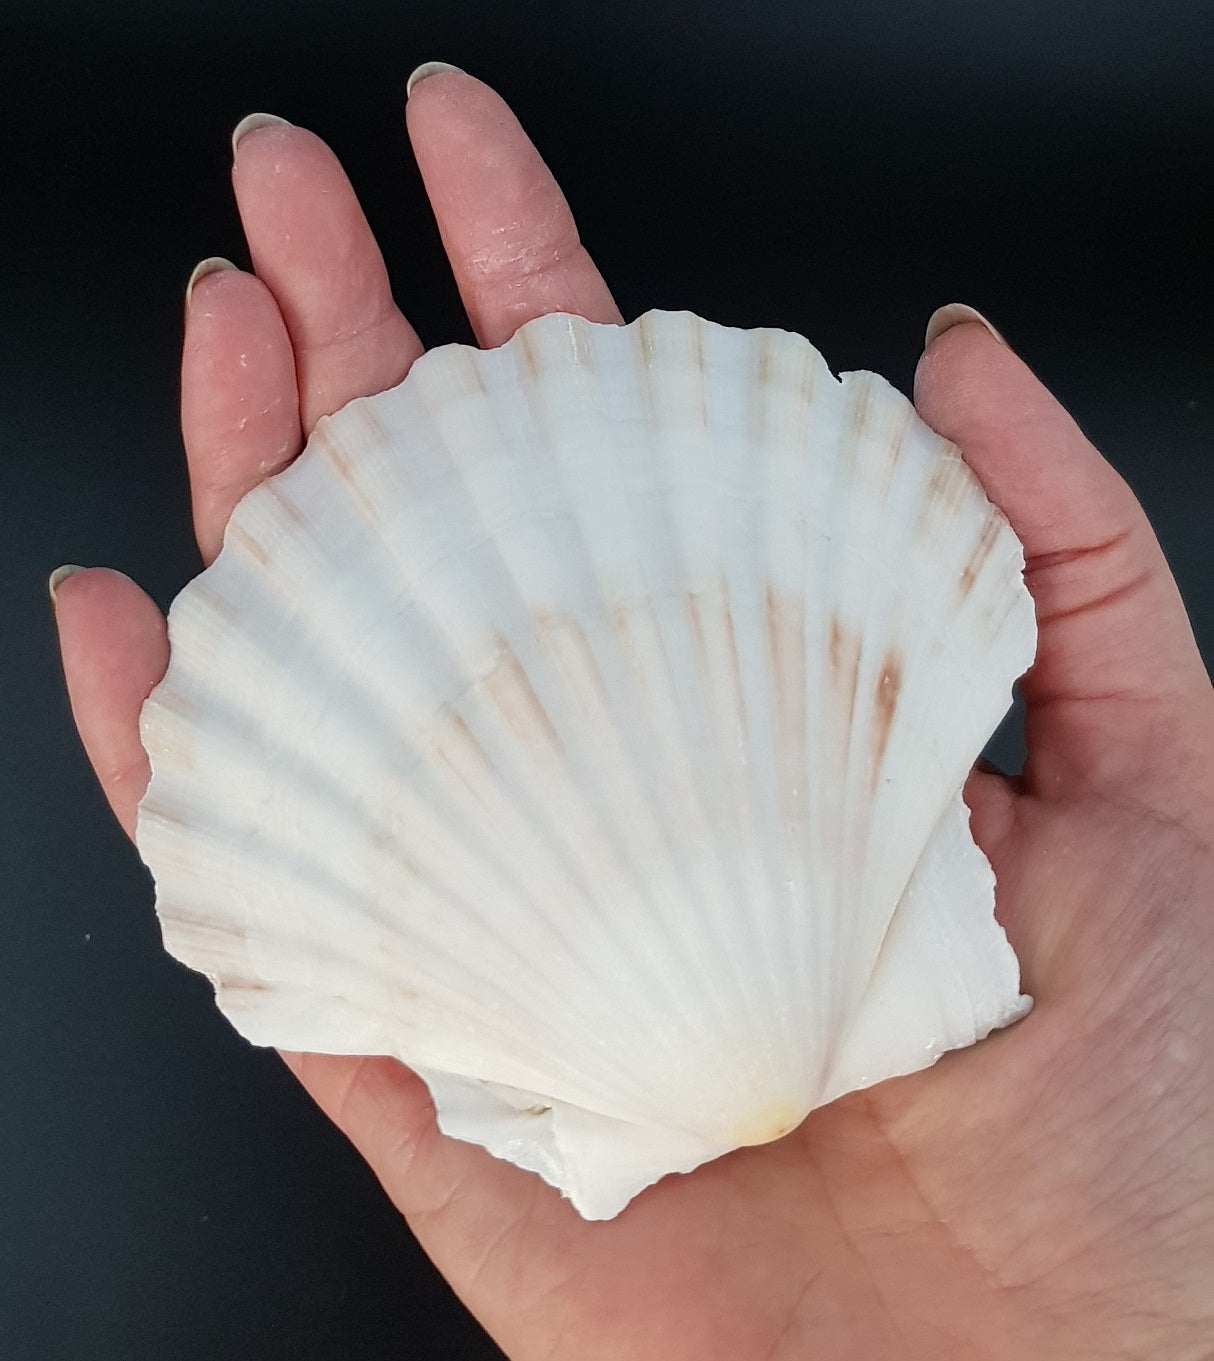 Natural White Scallop Shells - for catering, display and crafts - cleaned and edged